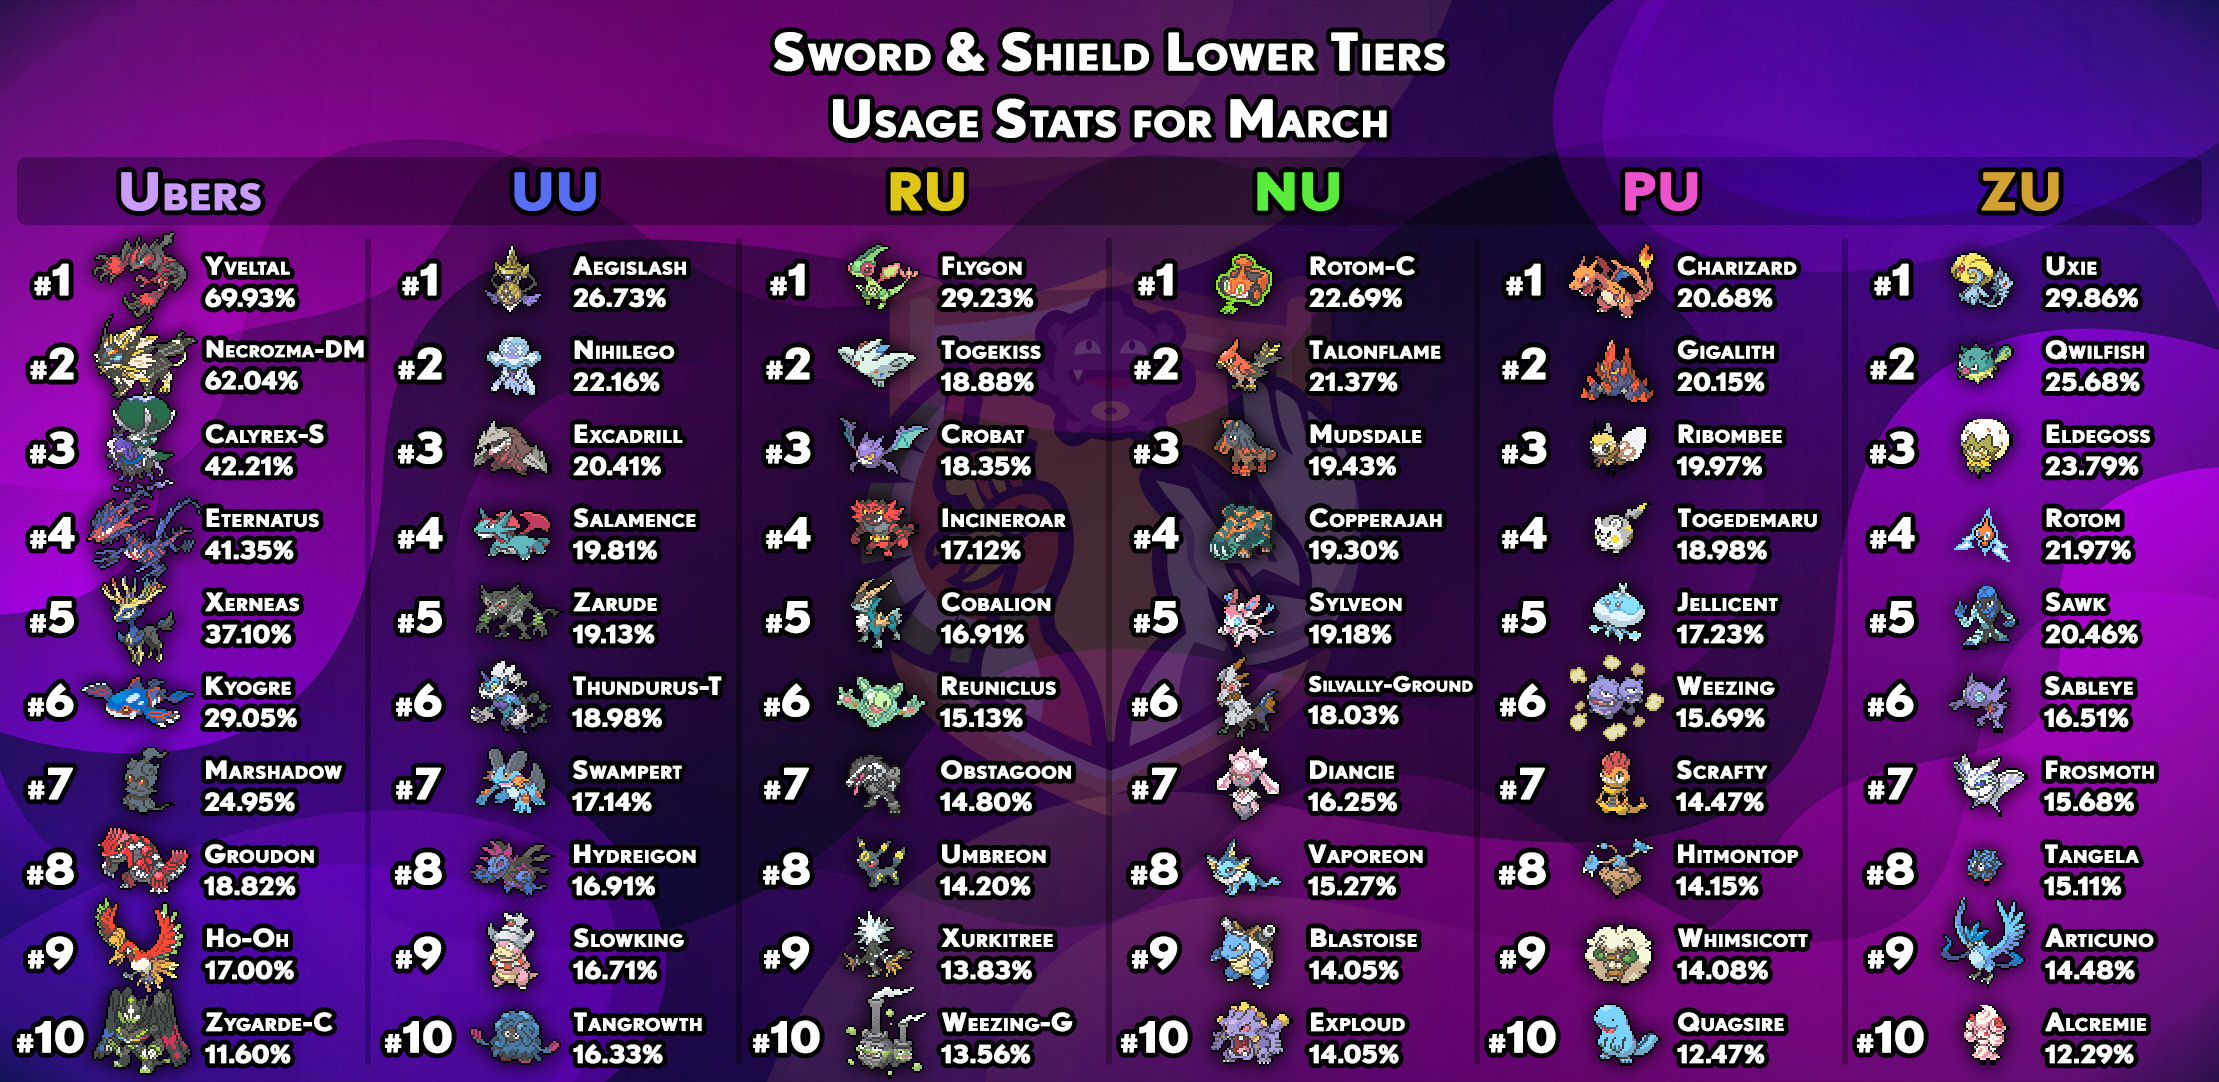 usagestats-gen8-other-tiers-march.png